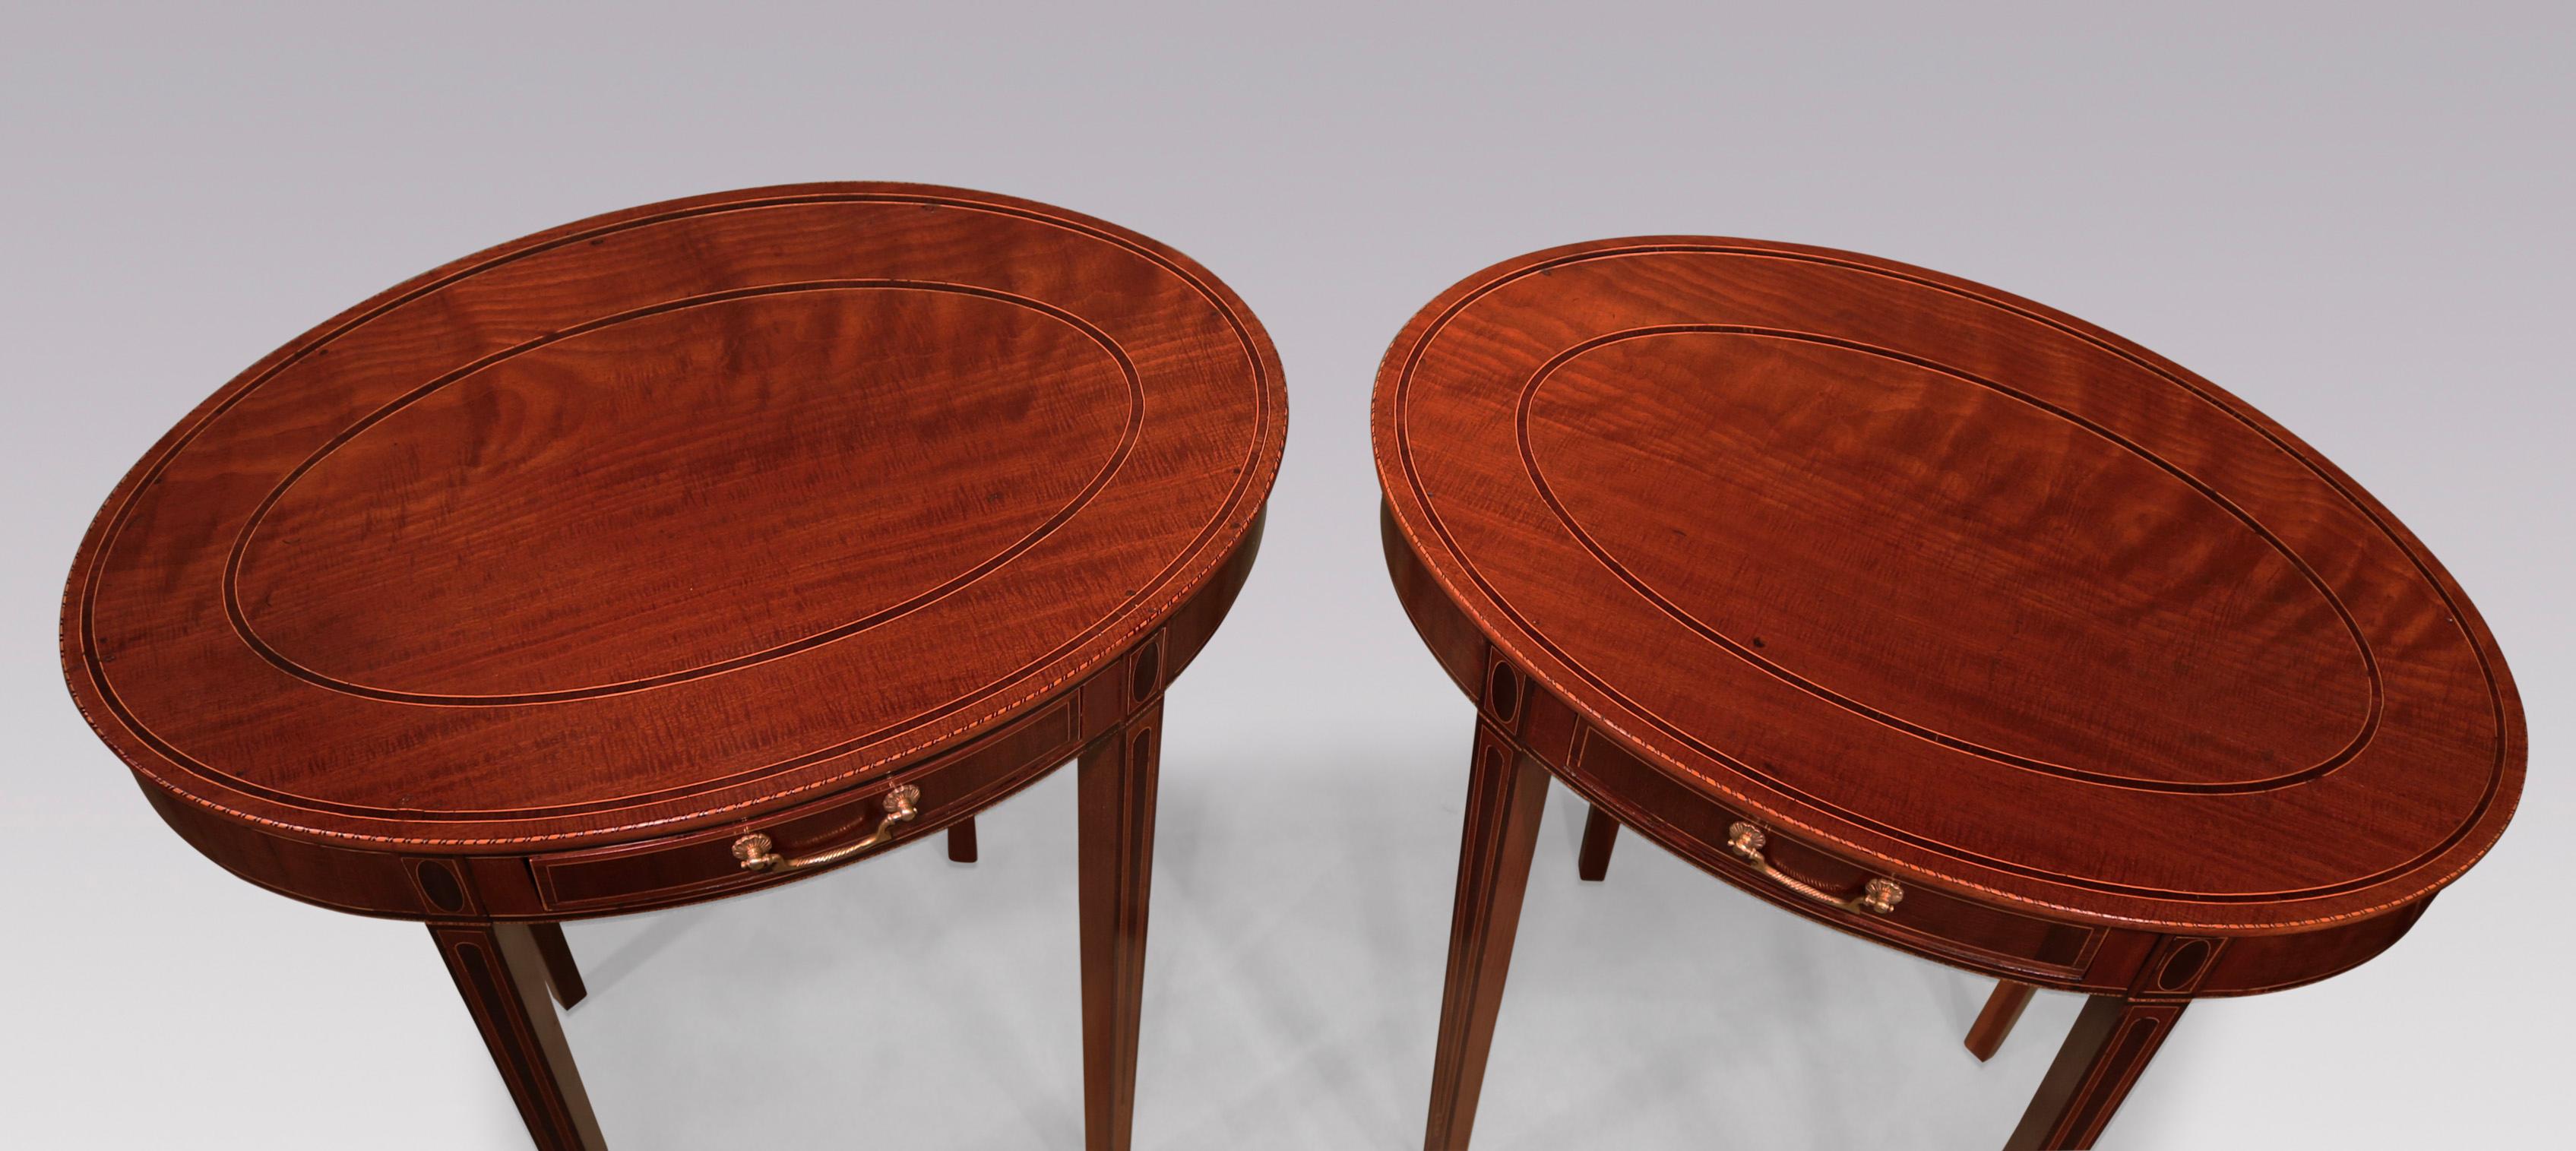 English A pair of late 18th century Sheraton period mahogany oval occasional tables For Sale